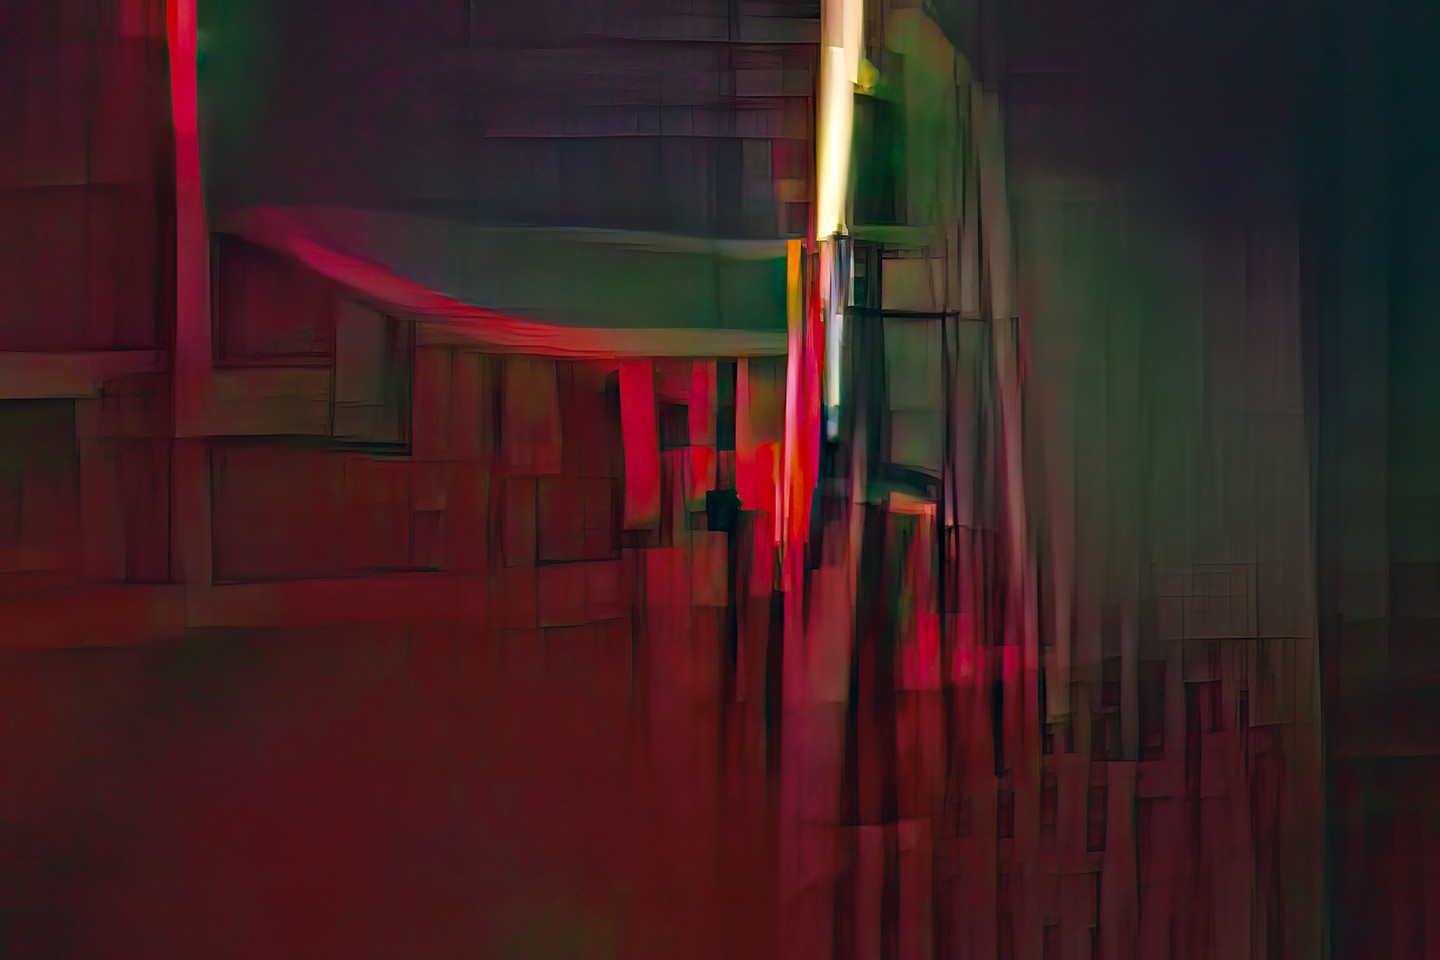 - Quay -
An abstraction of a warehouse alongside a quay at night. From my Found Art 2023 series.

https://www.saatchiart